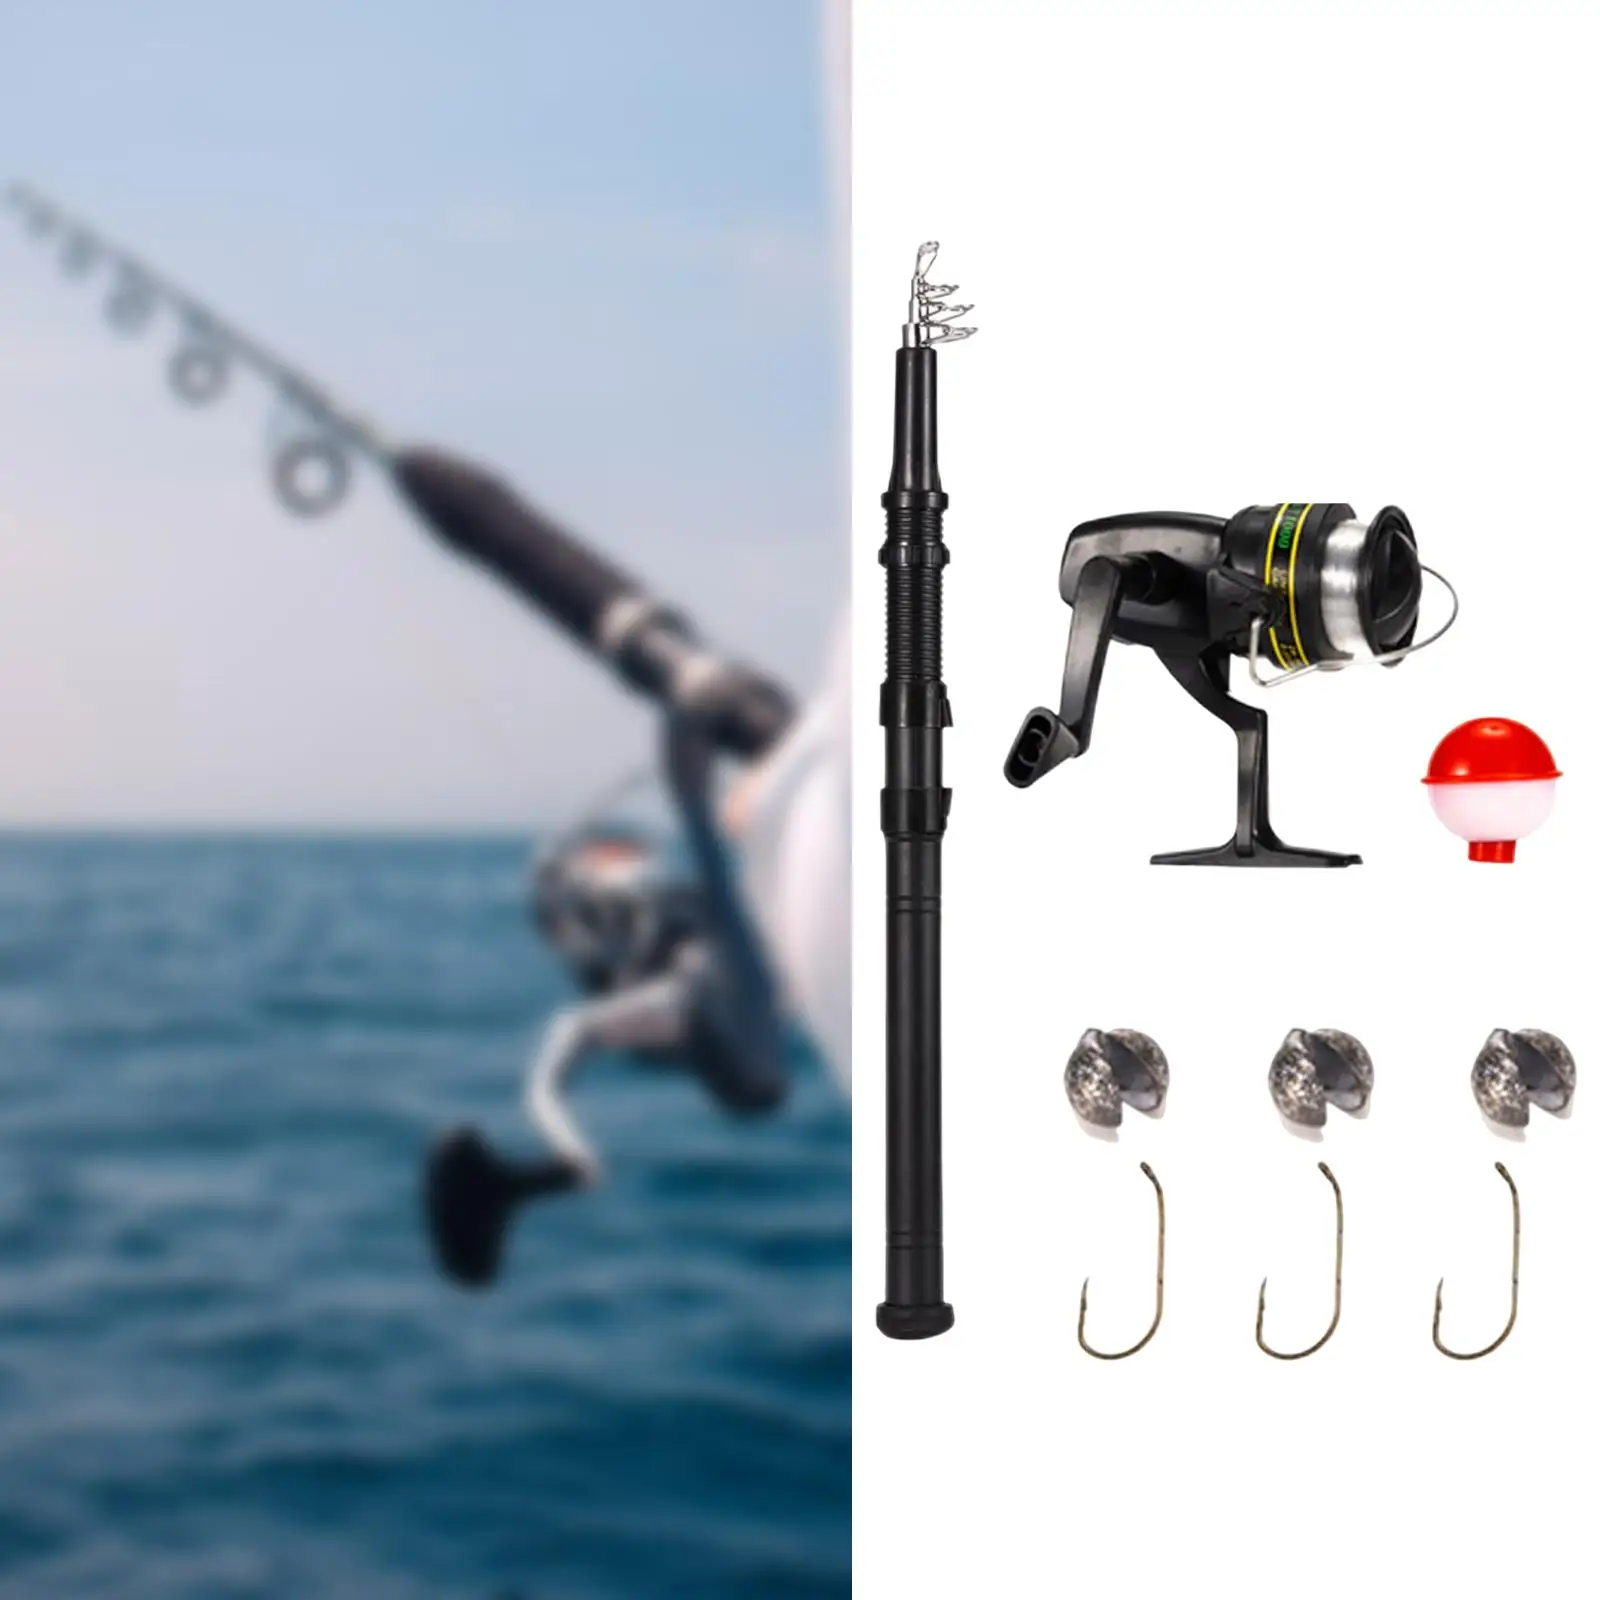 Retractable Reel and Fishing Rod Combo 1.6M and Line Lake Metal Tackle Set for Salmon Carp Fishing Bass Trout Sea Travel